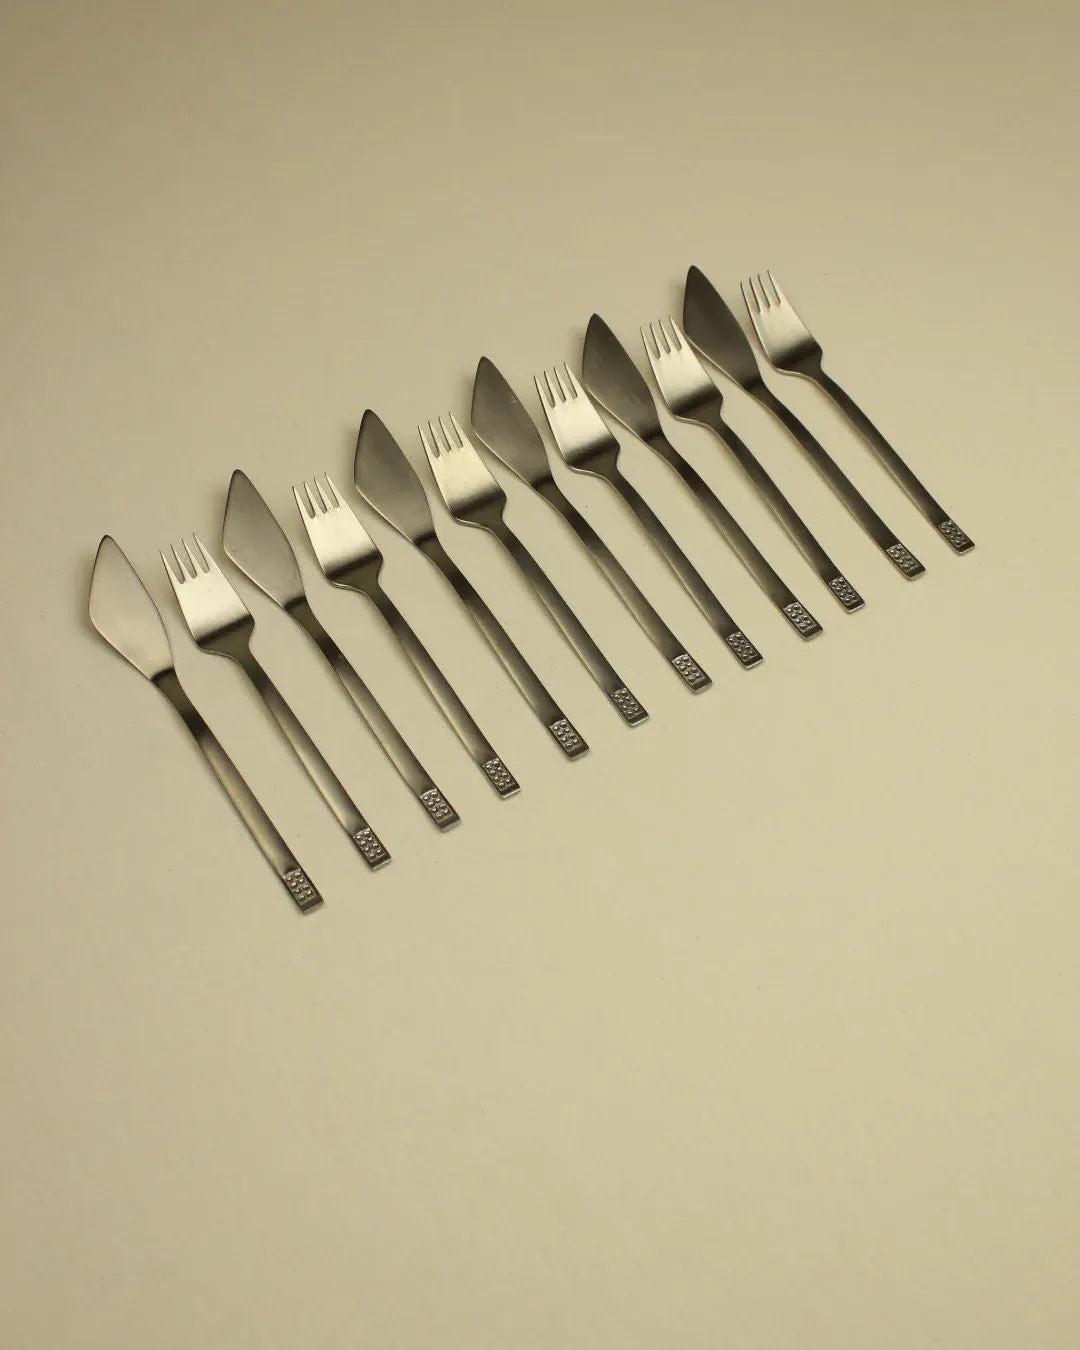 Eight satin stainless steel forks with unique square-ended handles and tined edges aligned diagonally across a cream background of the Cutlery Set 70s Style by Boga Avante Shop.